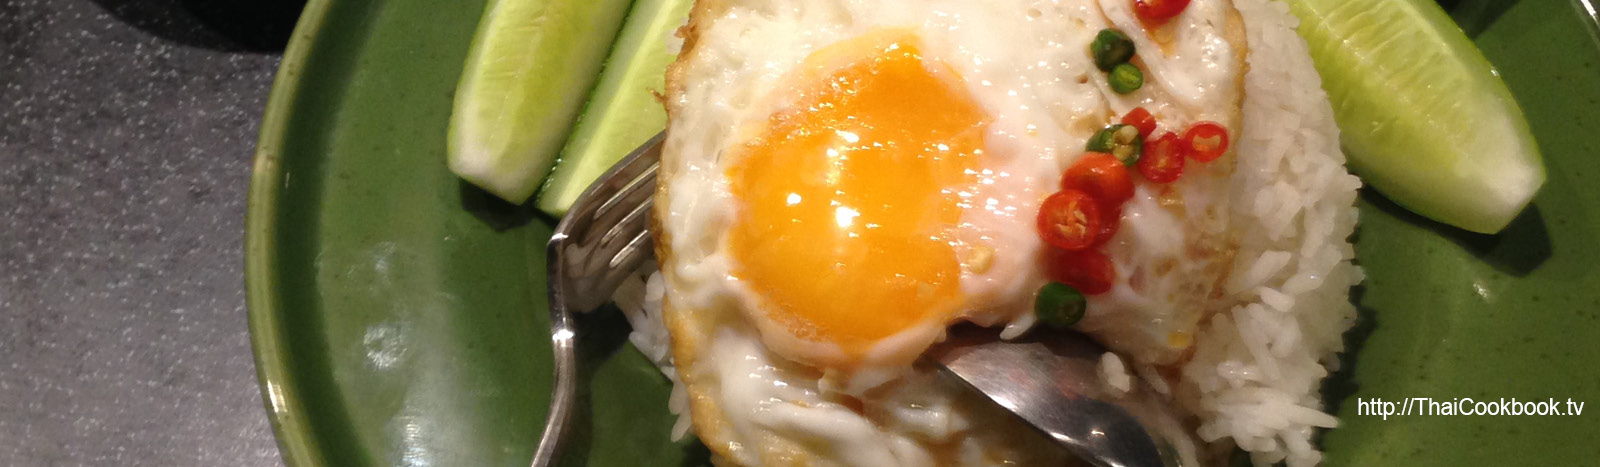 Authentic Thai recipe for Fried Egg over Rice